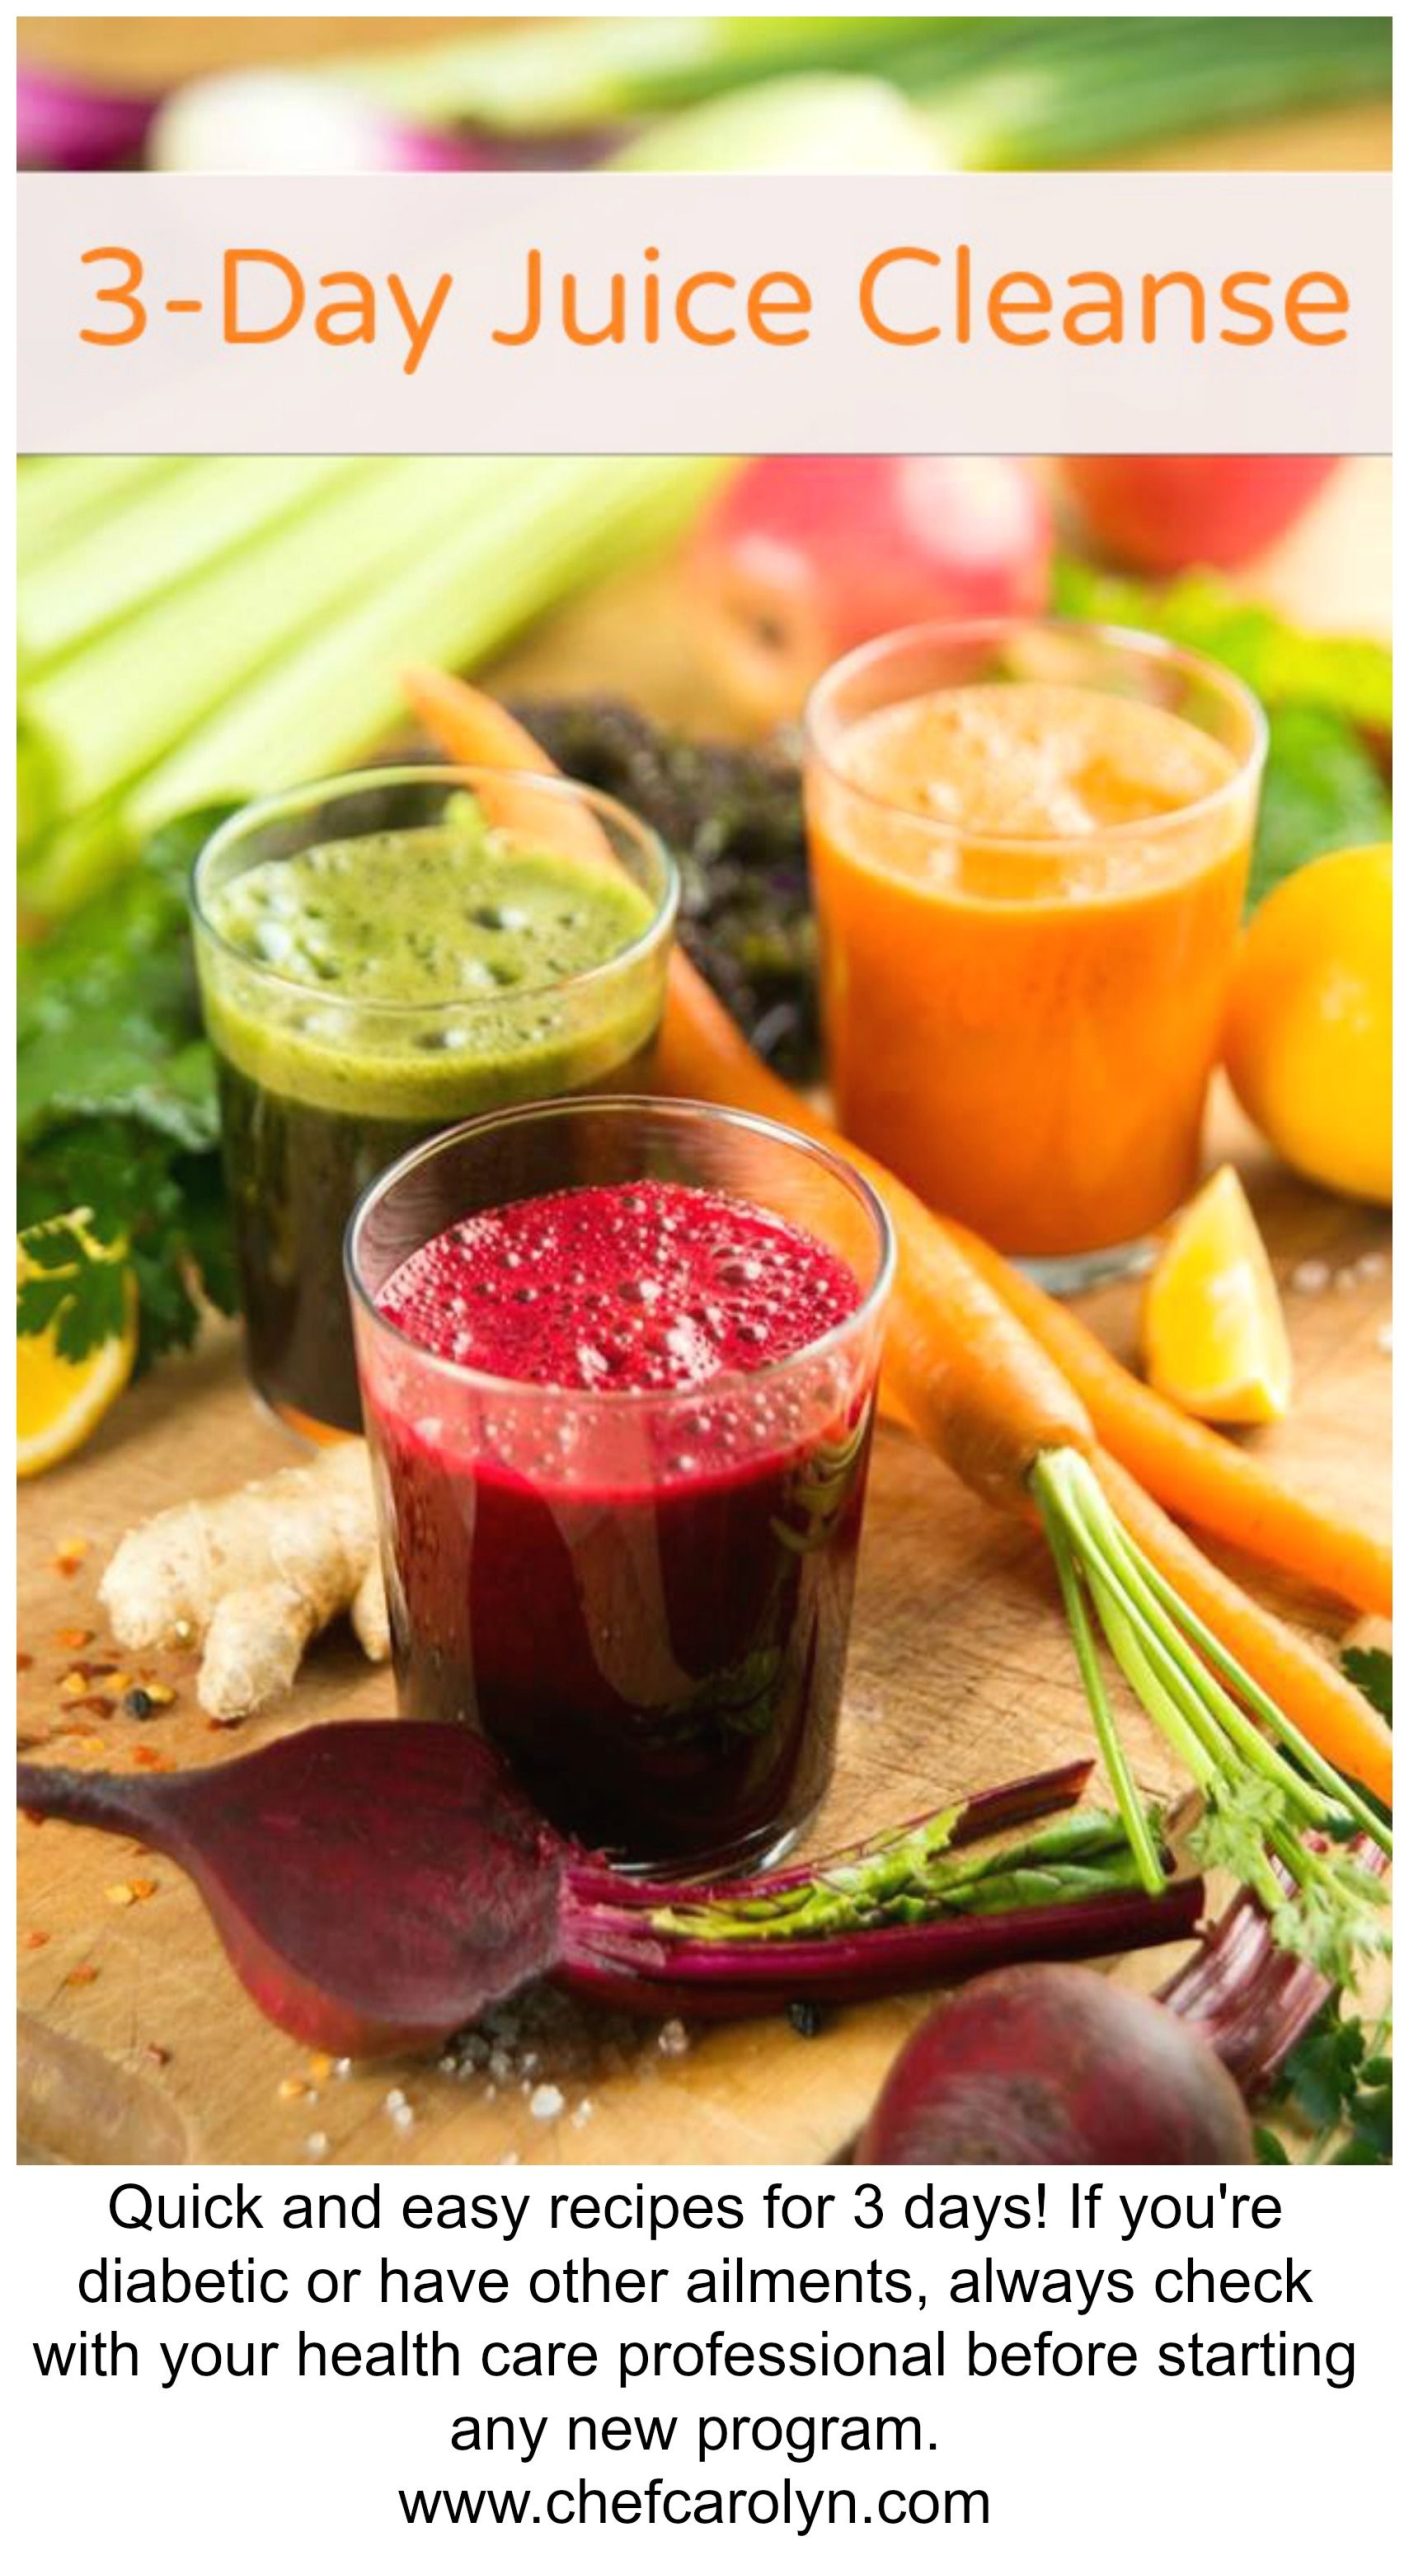 3 Day Juice Cleanse Recipes Pdf